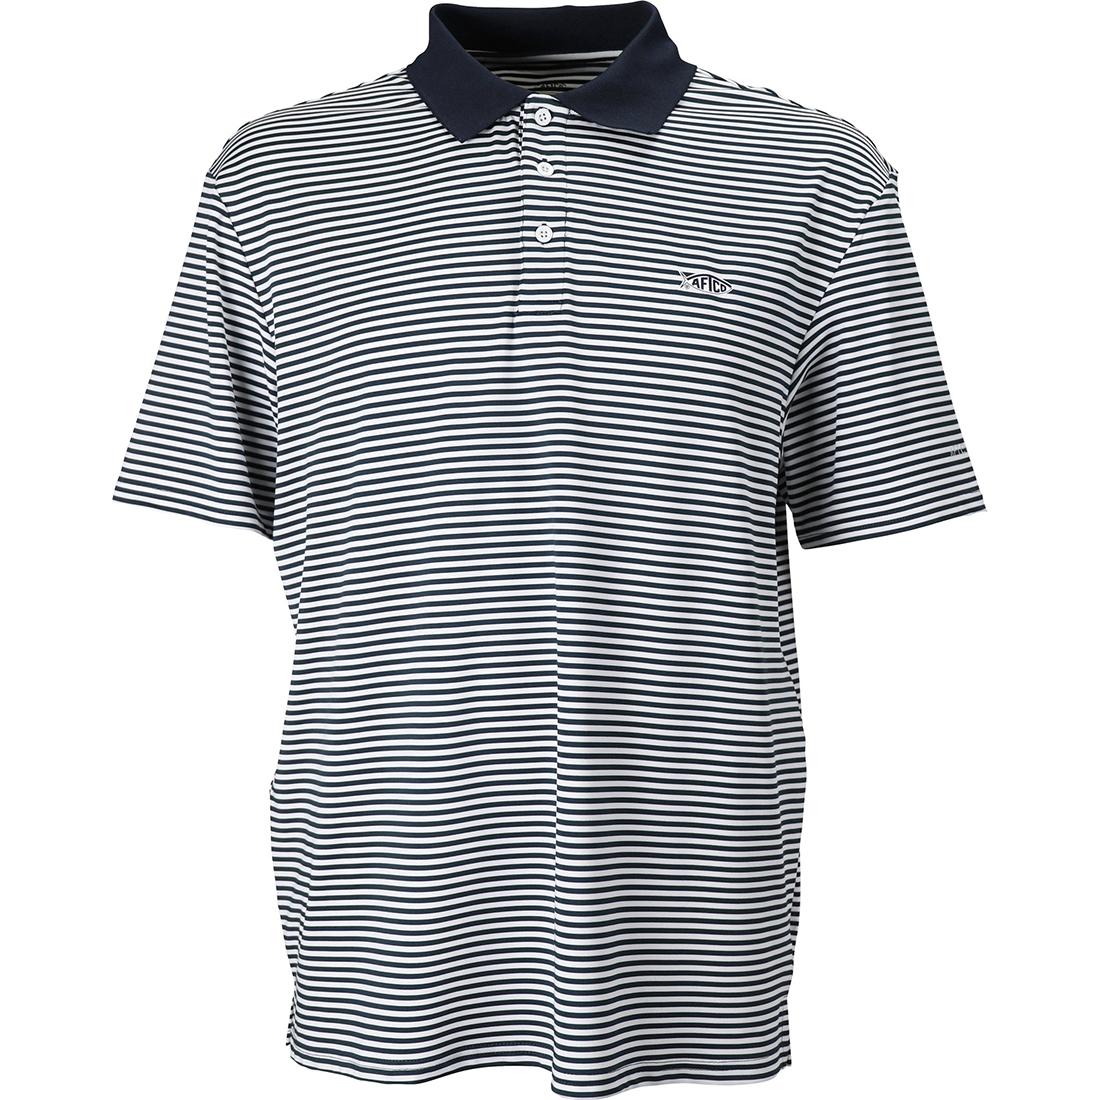 Aftco REPLAY SS SHIRT POLO